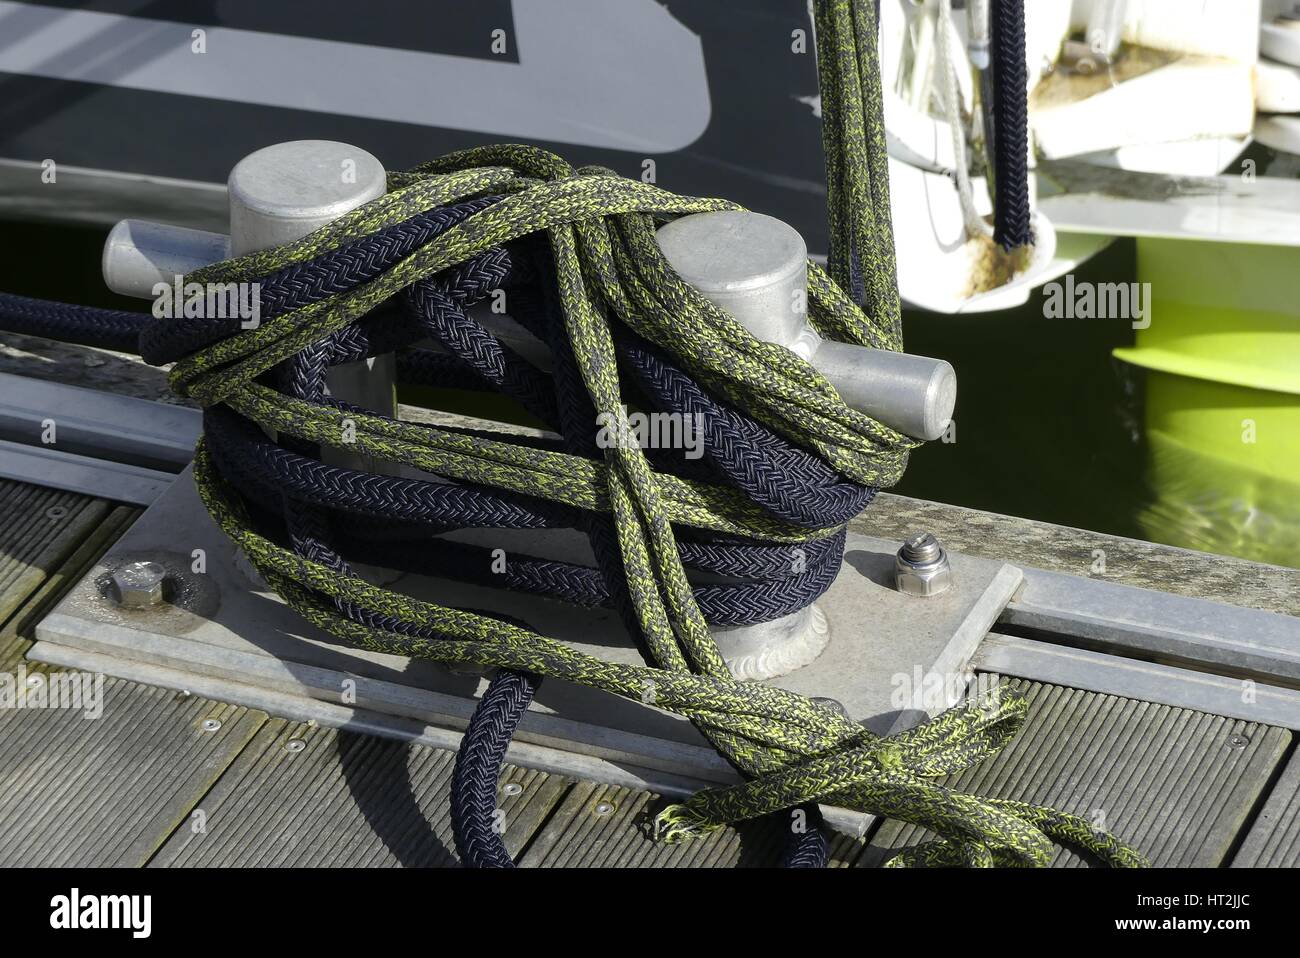 Details of mooring arrangement on aluminum bollard at the marina with mooring ropes tied around. Stock Photo